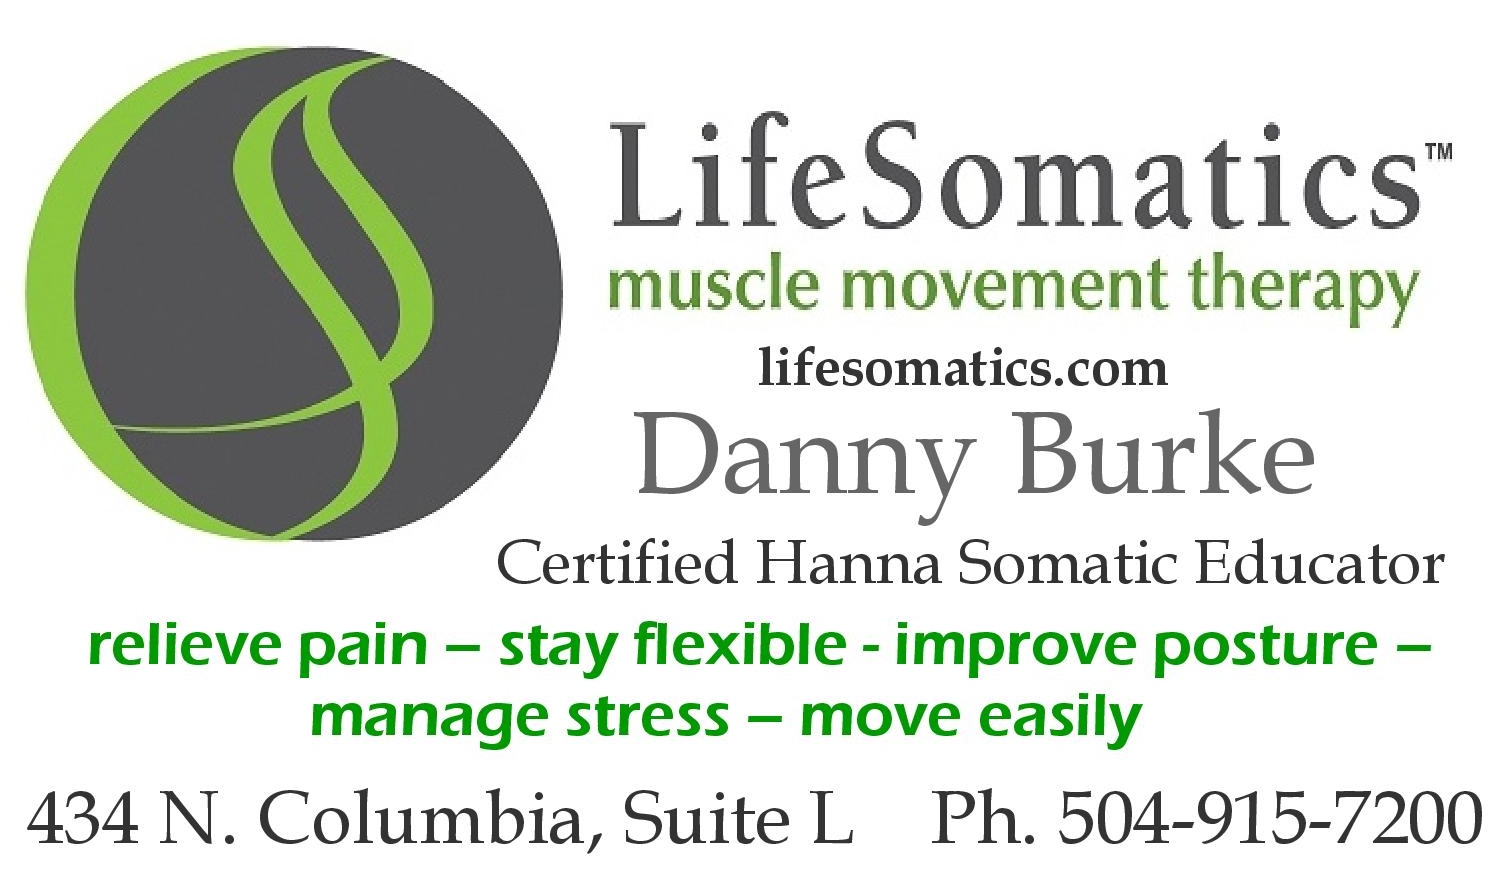 Somatics For Pain Relief, Correct Posture:  Sign Up Now and Save $25